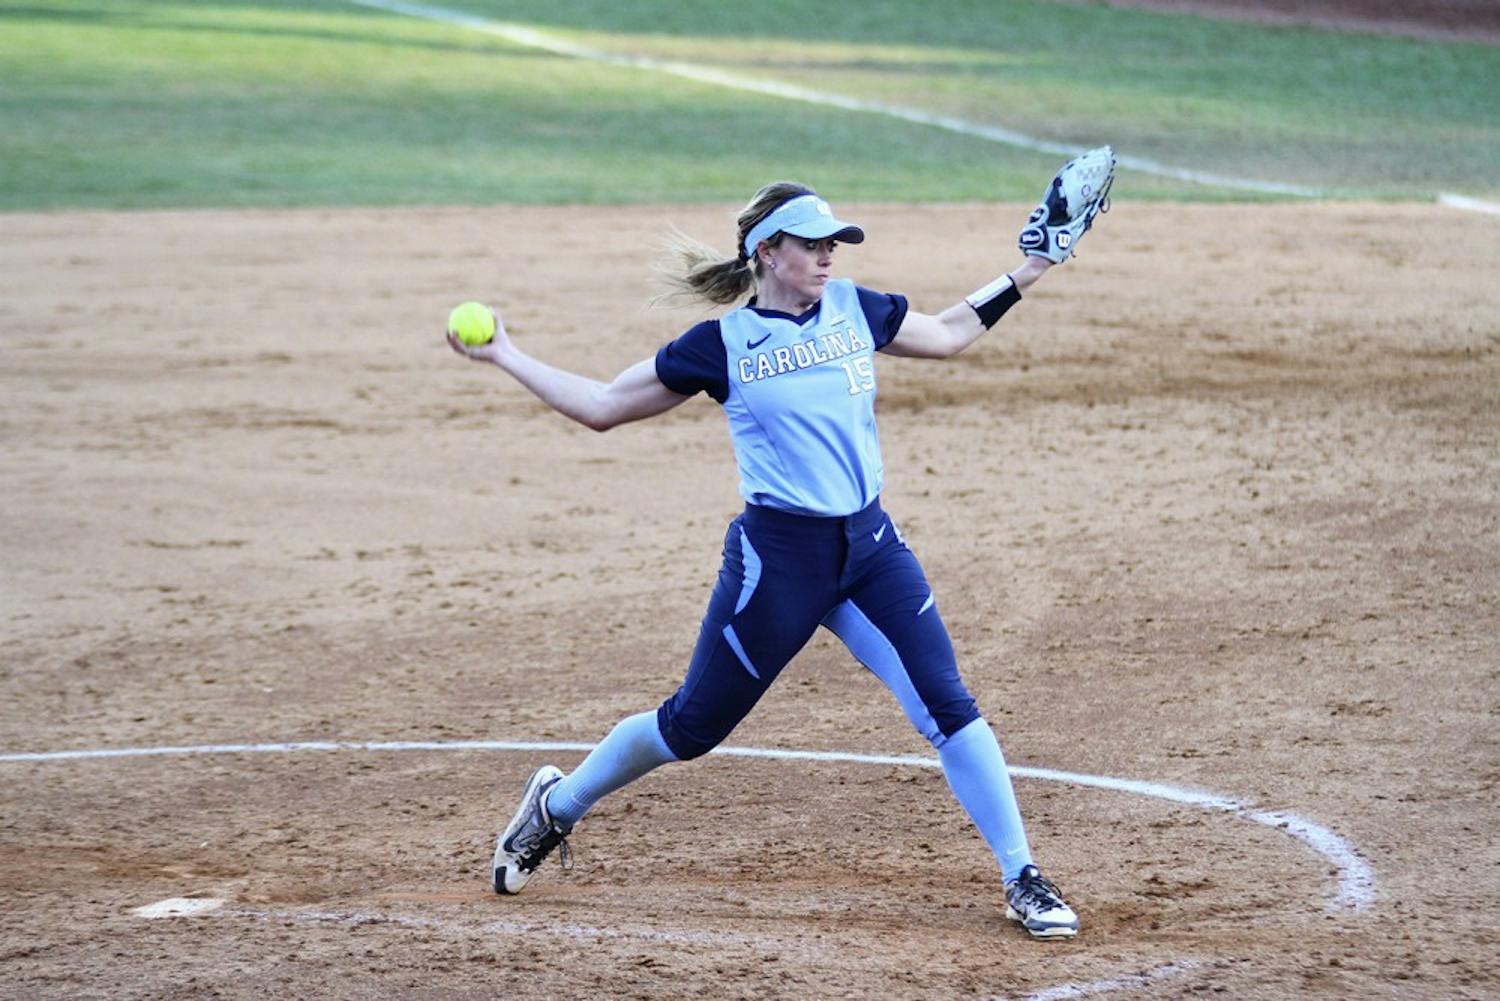 Junior Kendra Lynch (15) pitches the ball in the game against Georgetown February 28.